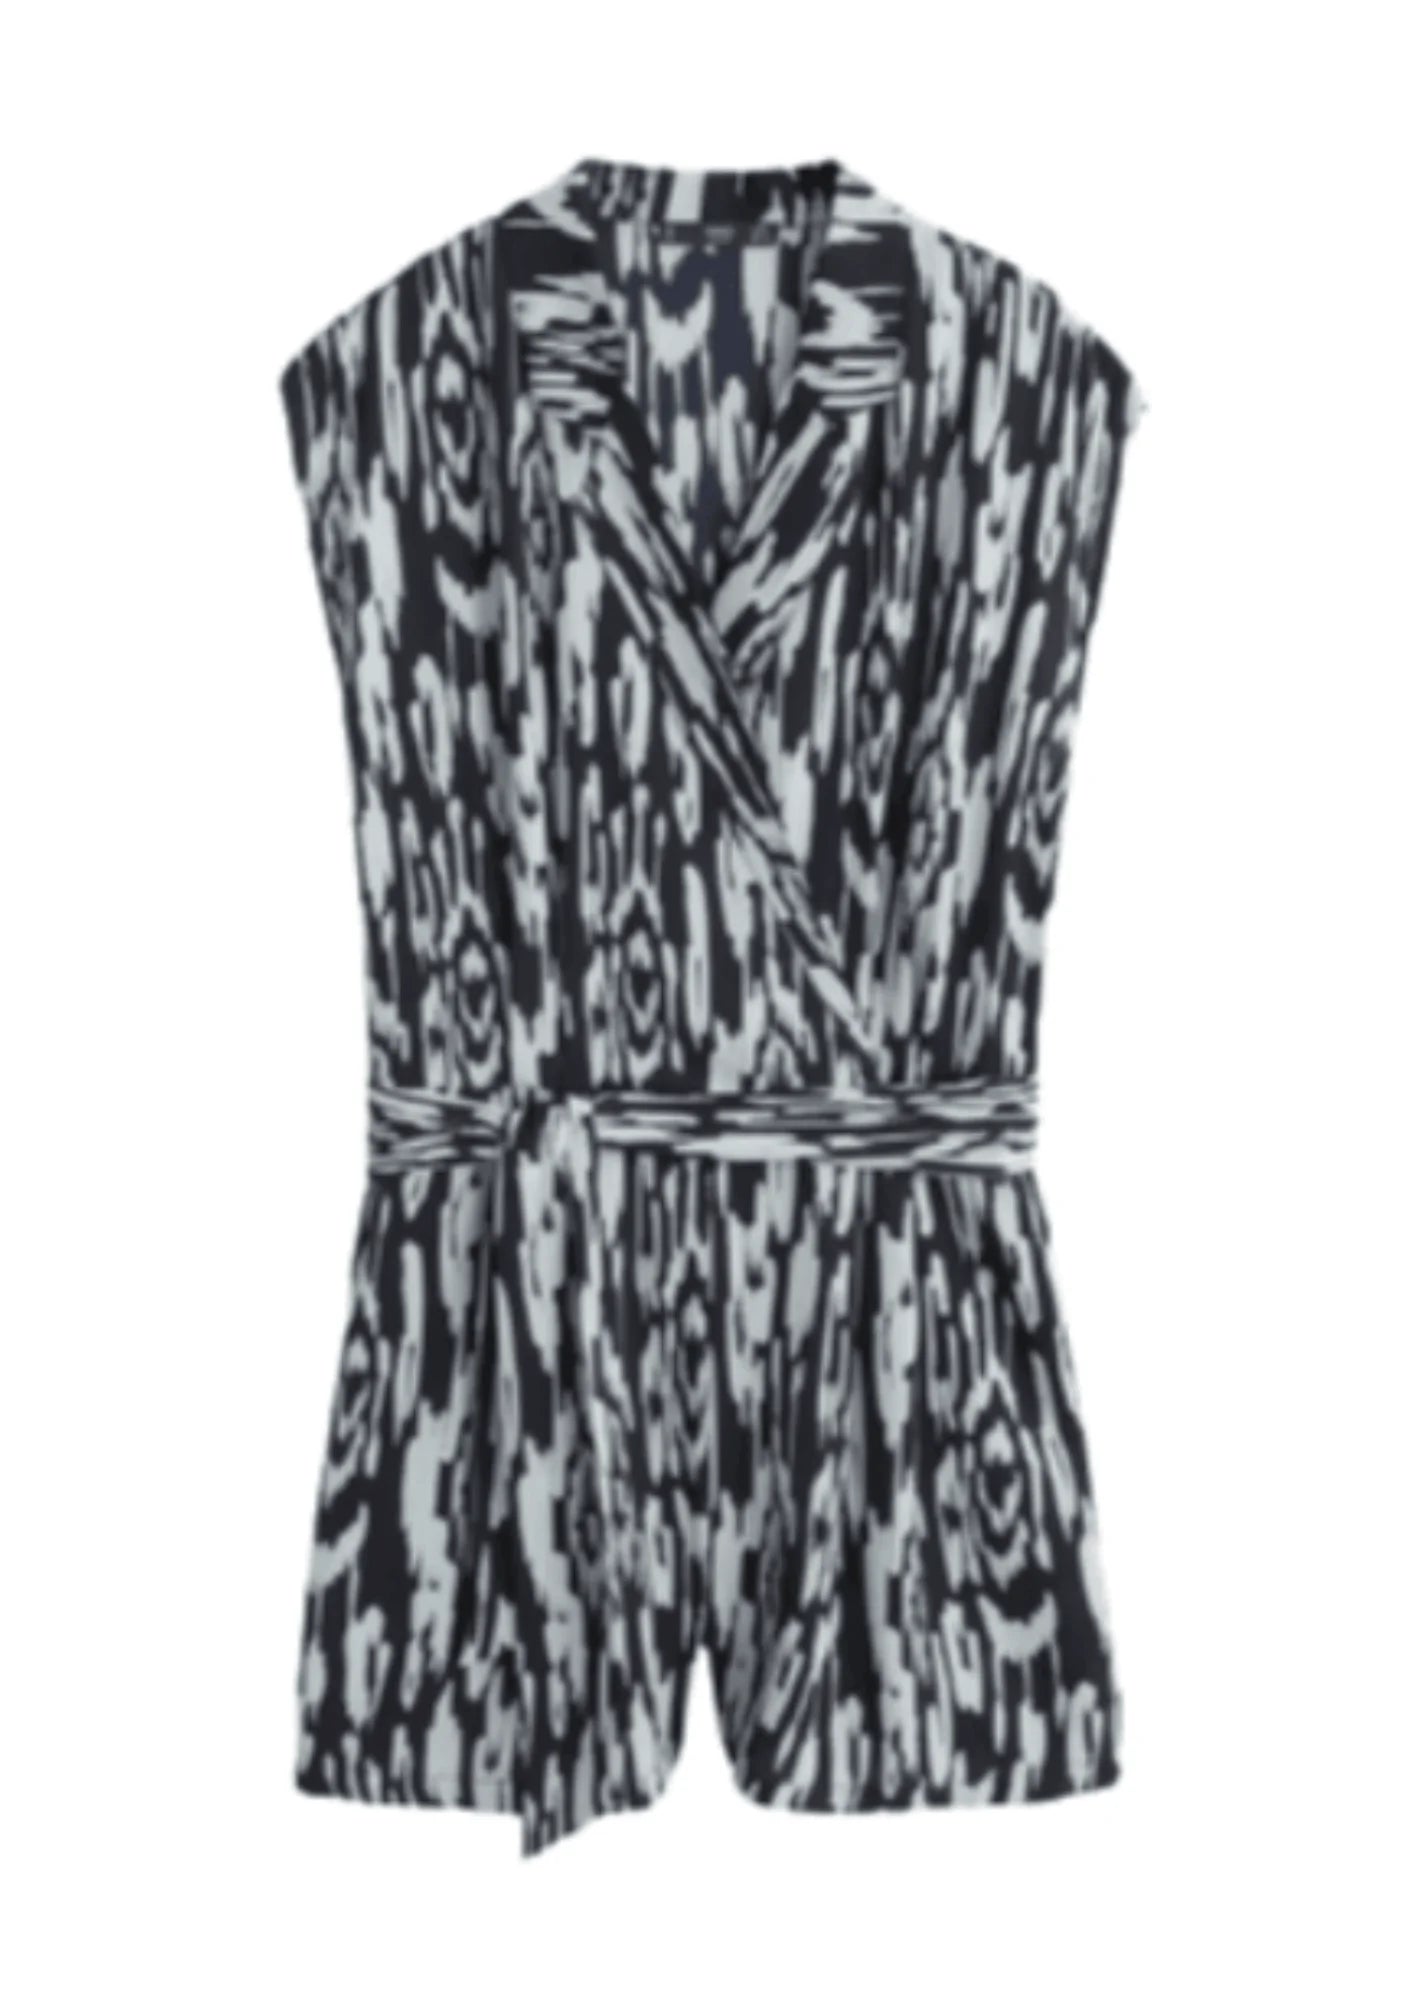 BLACK AND WHITE PLAYSUIT